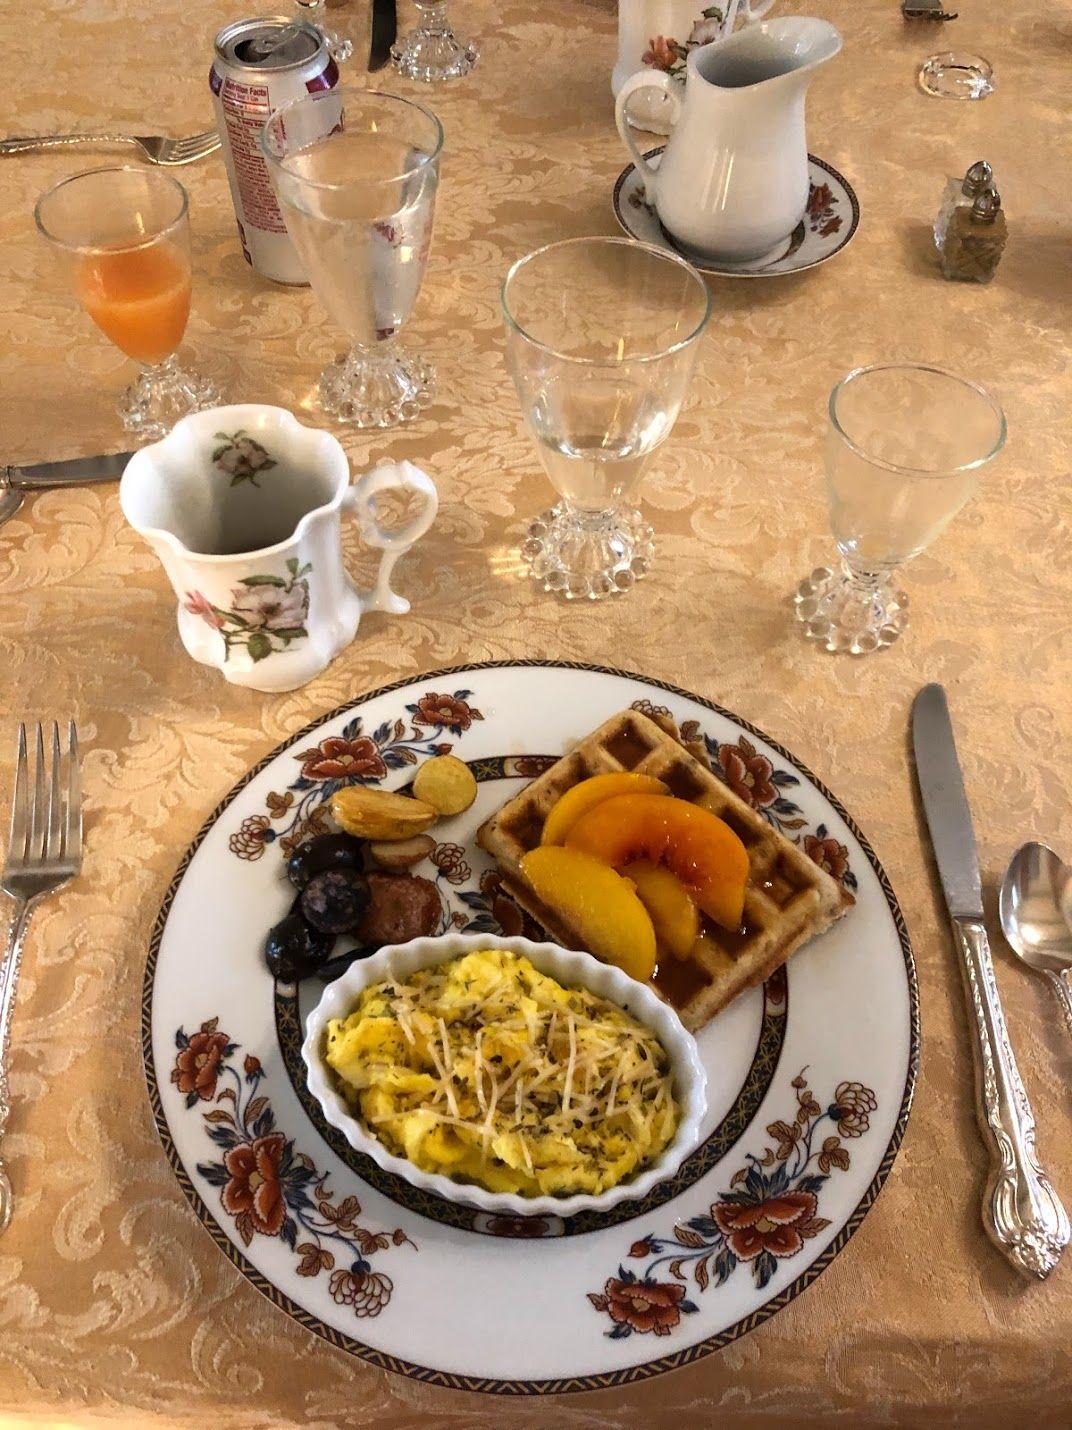 A plate of breakfast food with a waffle topped with fruit and cheesy potatoes. There is beautiful china and a mug next to the plate.